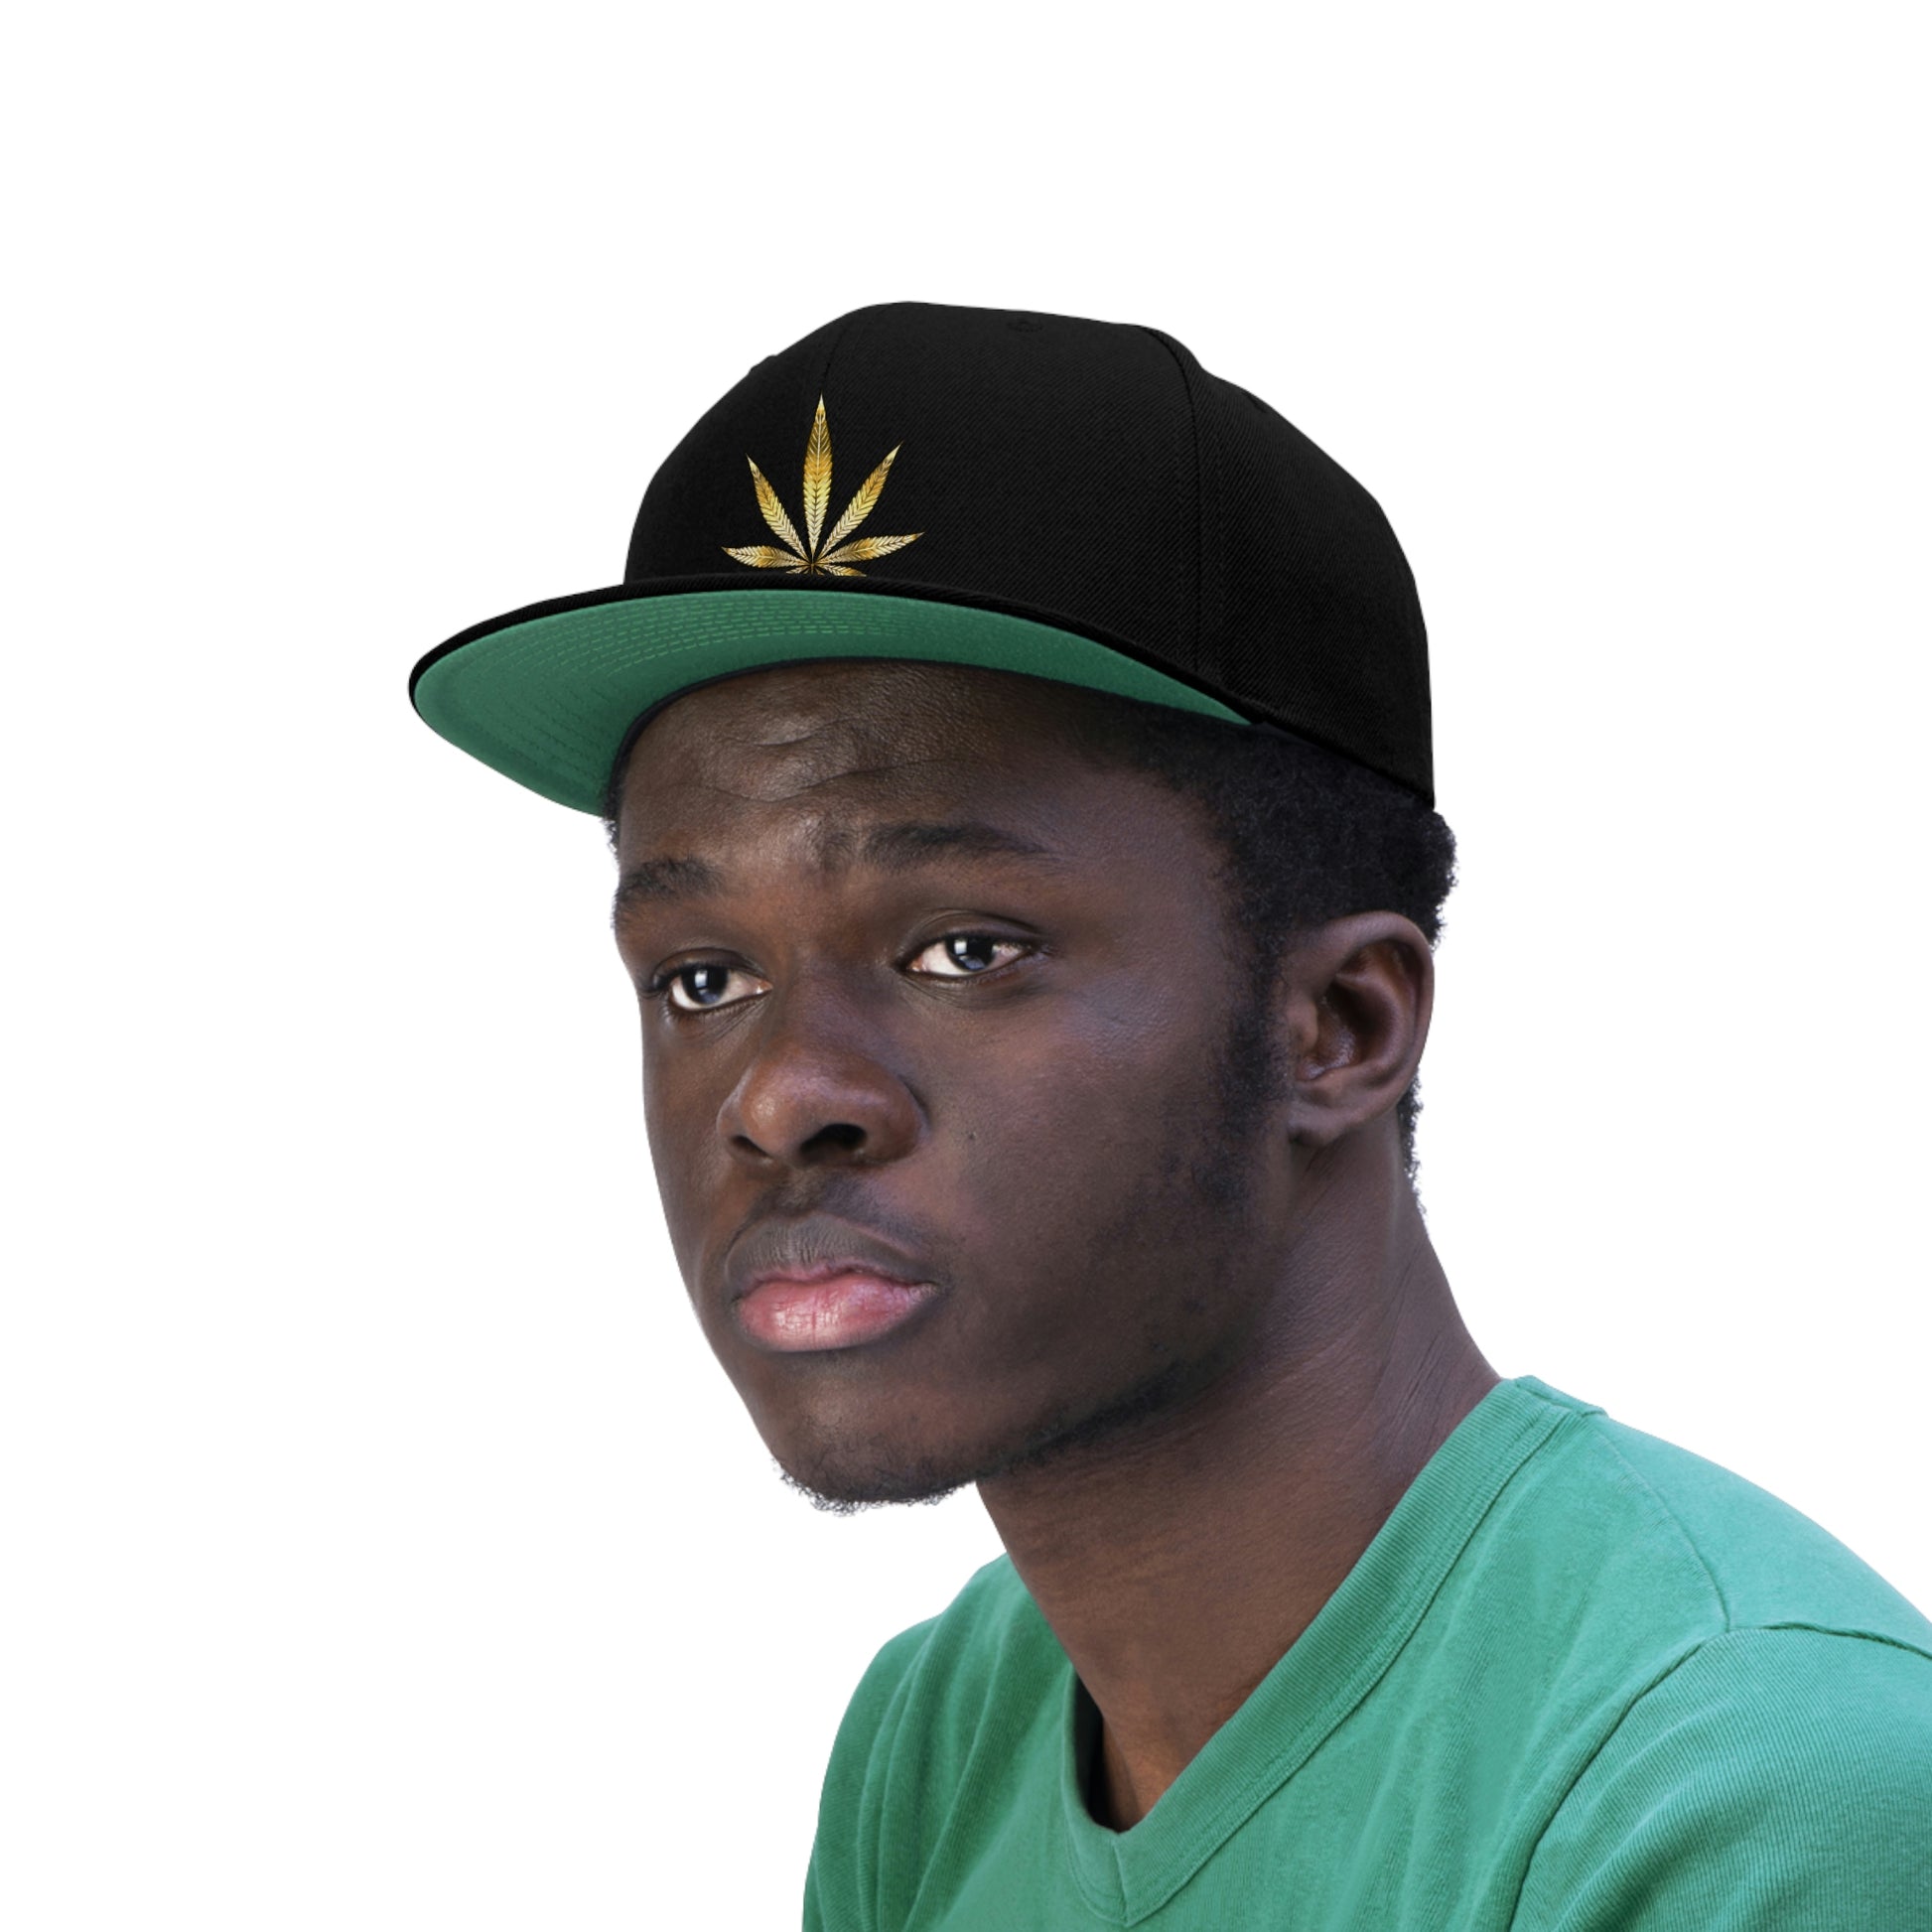 A young man sports the all black Gold Marijuana Leaf Snapback Hat with green underbill